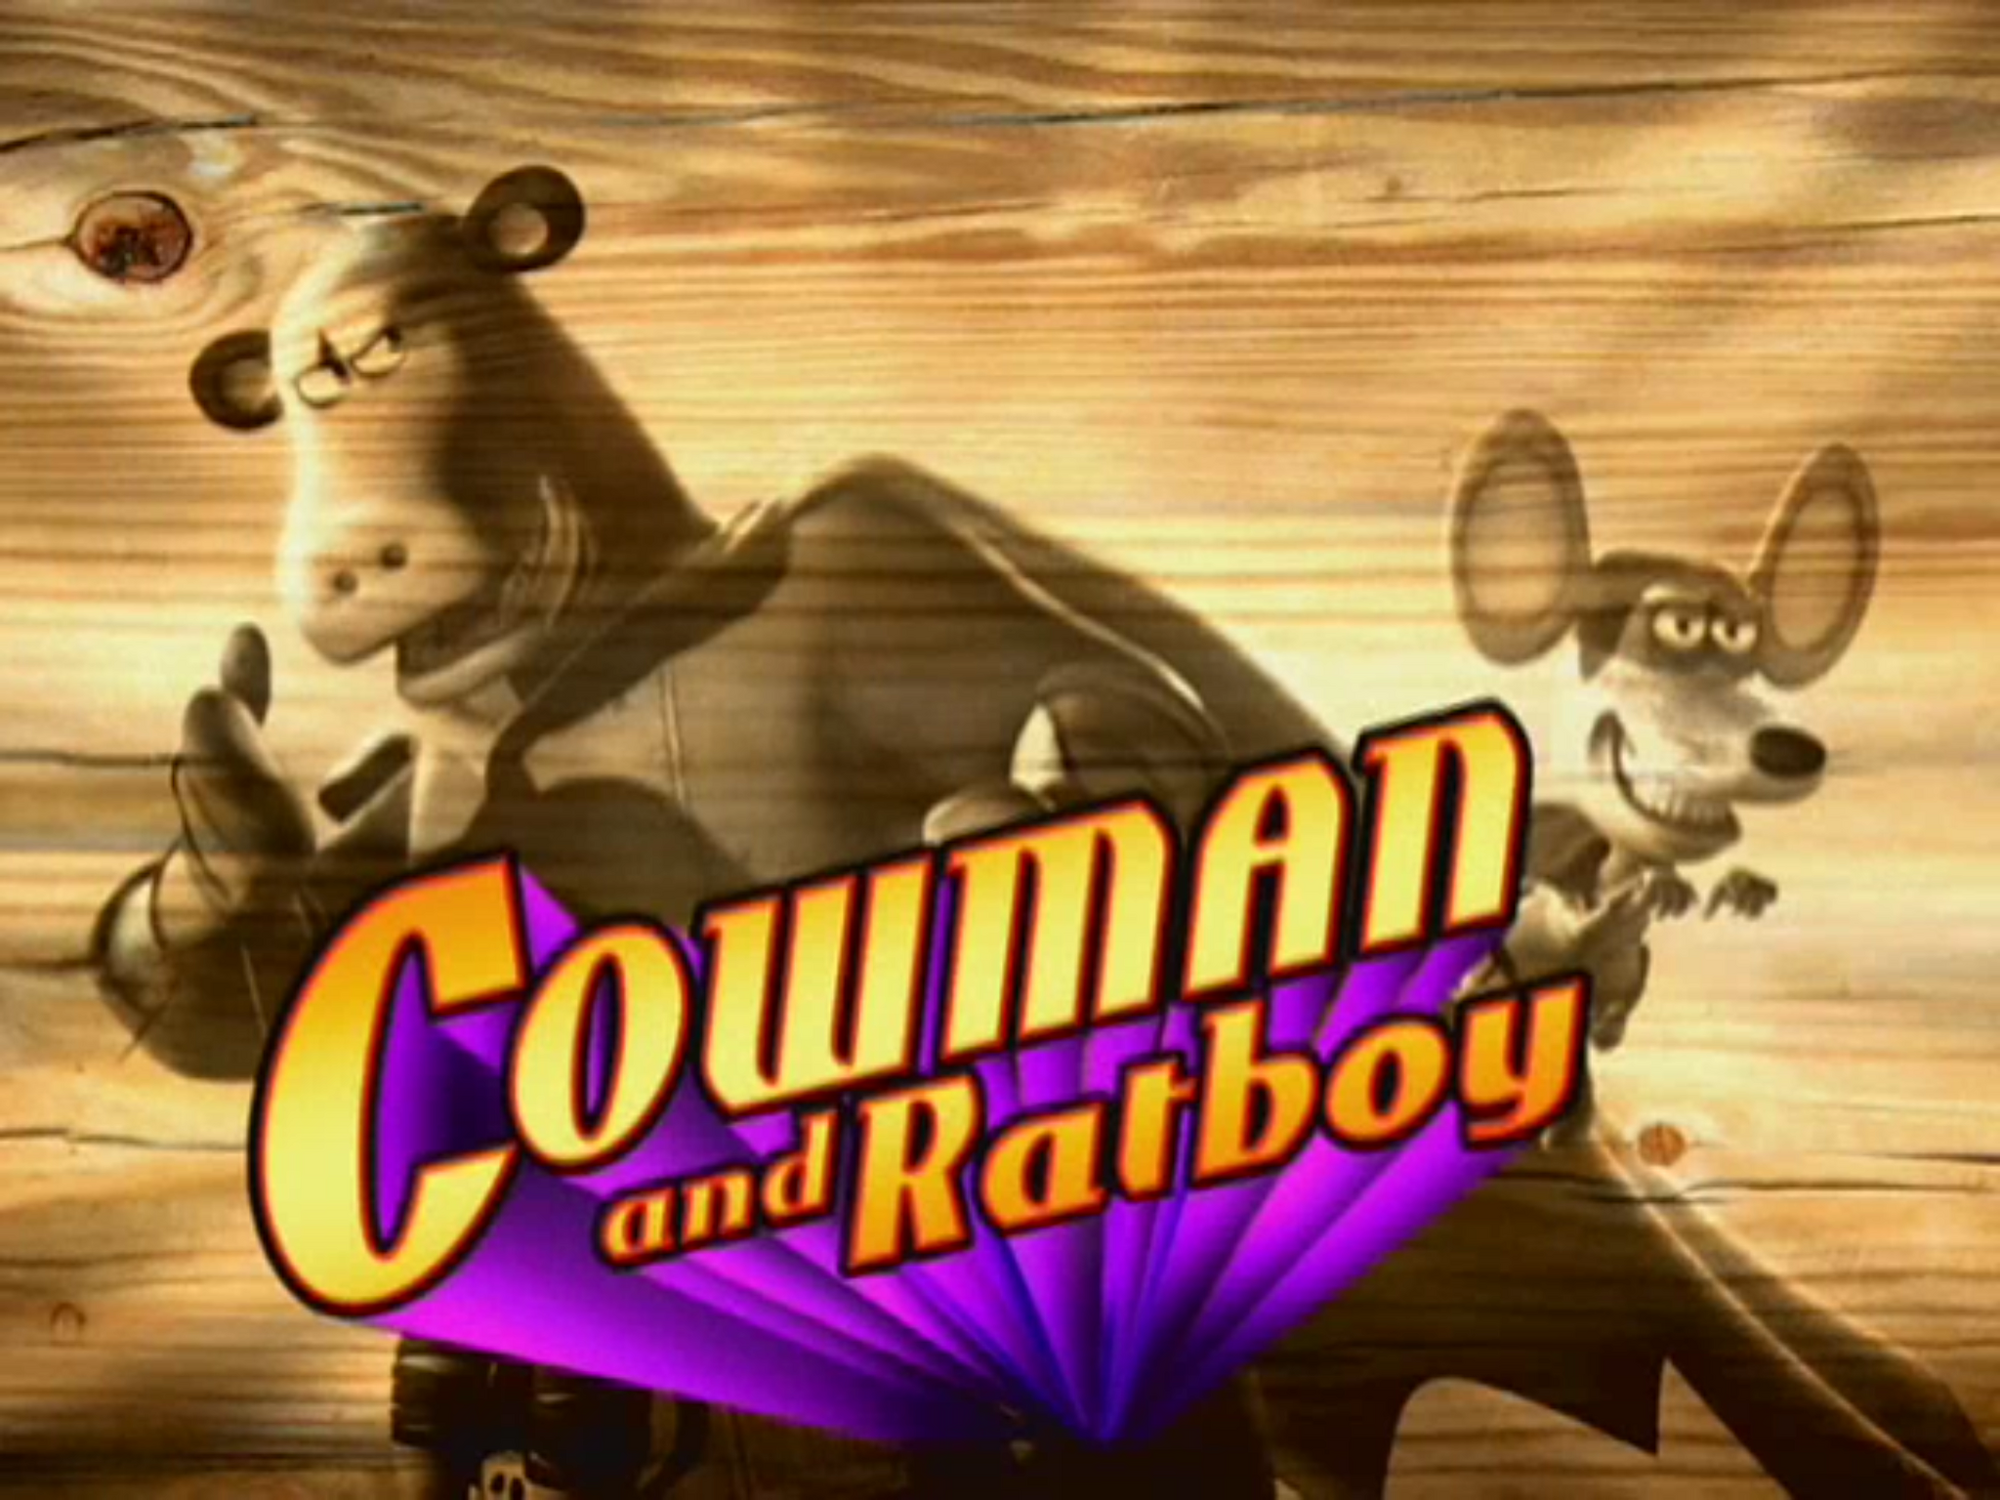 Cowman and Ratboy/Transcript | Pooh's Adventures Wiki | FANDOM powered by Wikia